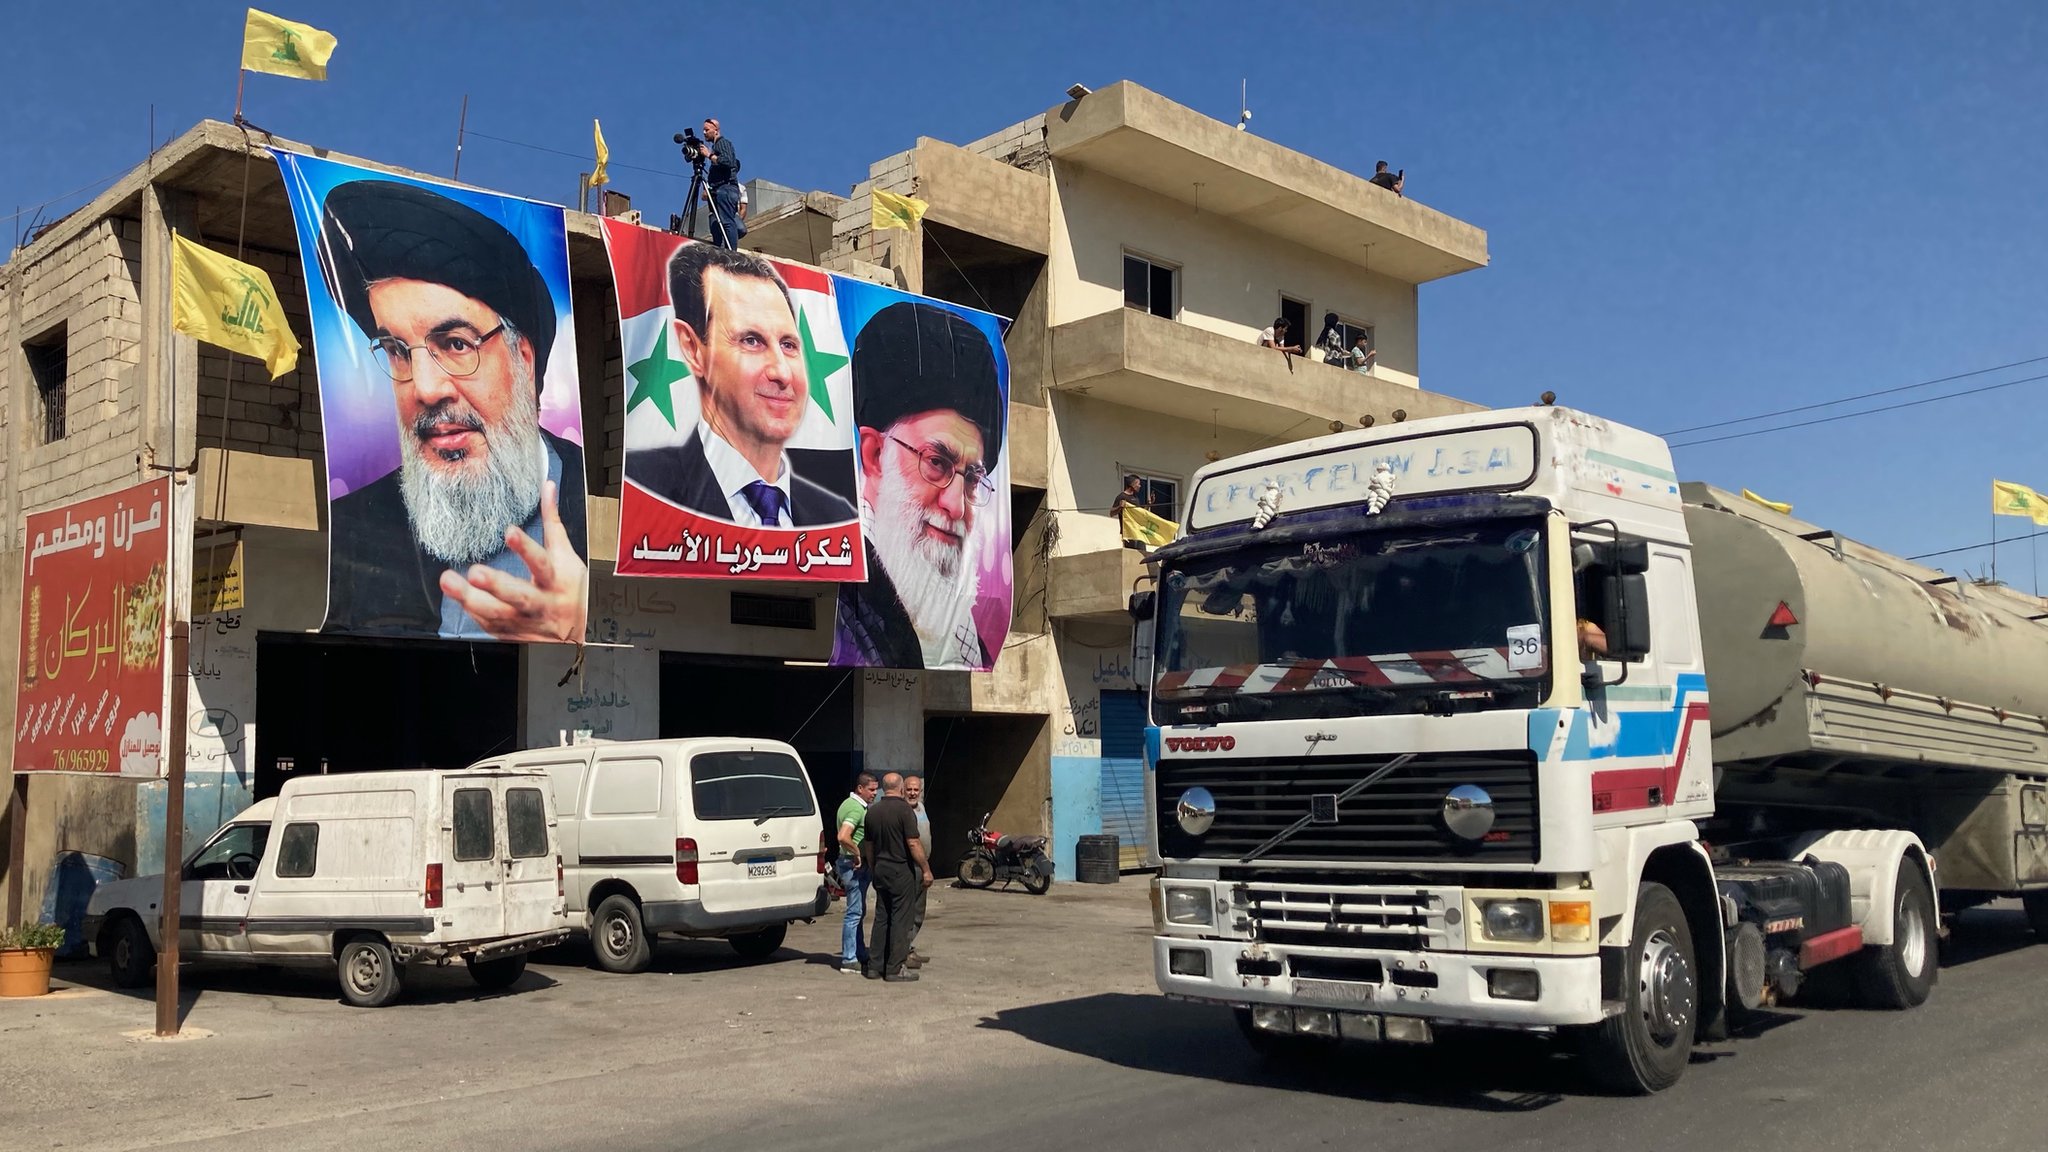 Posters of Hezbollah leader Hassan Nasrallah, Syrian President Bashar al-Assad and Iranian Supreme Leader Ali Khamenei on a building in al-Ain, as lorries bring Iranian fuel from Syria into Lebanon (16 September 2021)